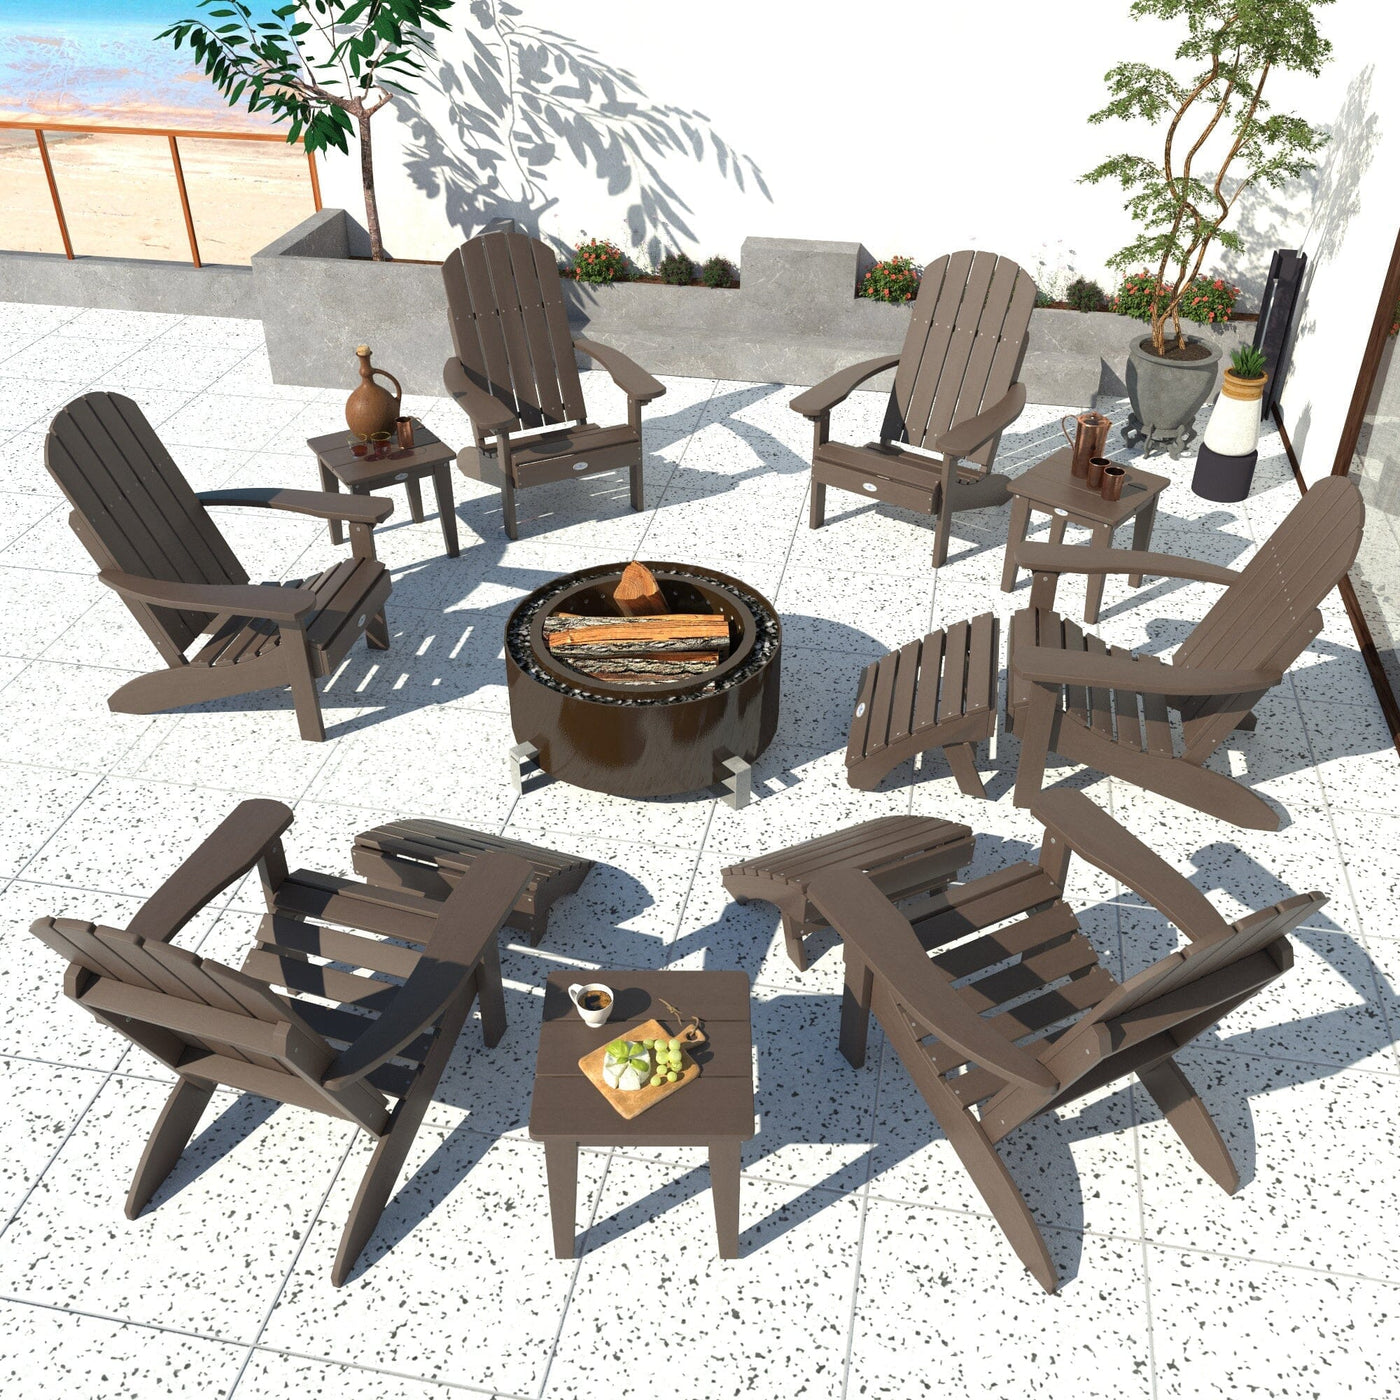 Cape Classic Adirondack, Side Table and Ottoman 12 pc Set Kitted Set Bahia Verde Outdoors 